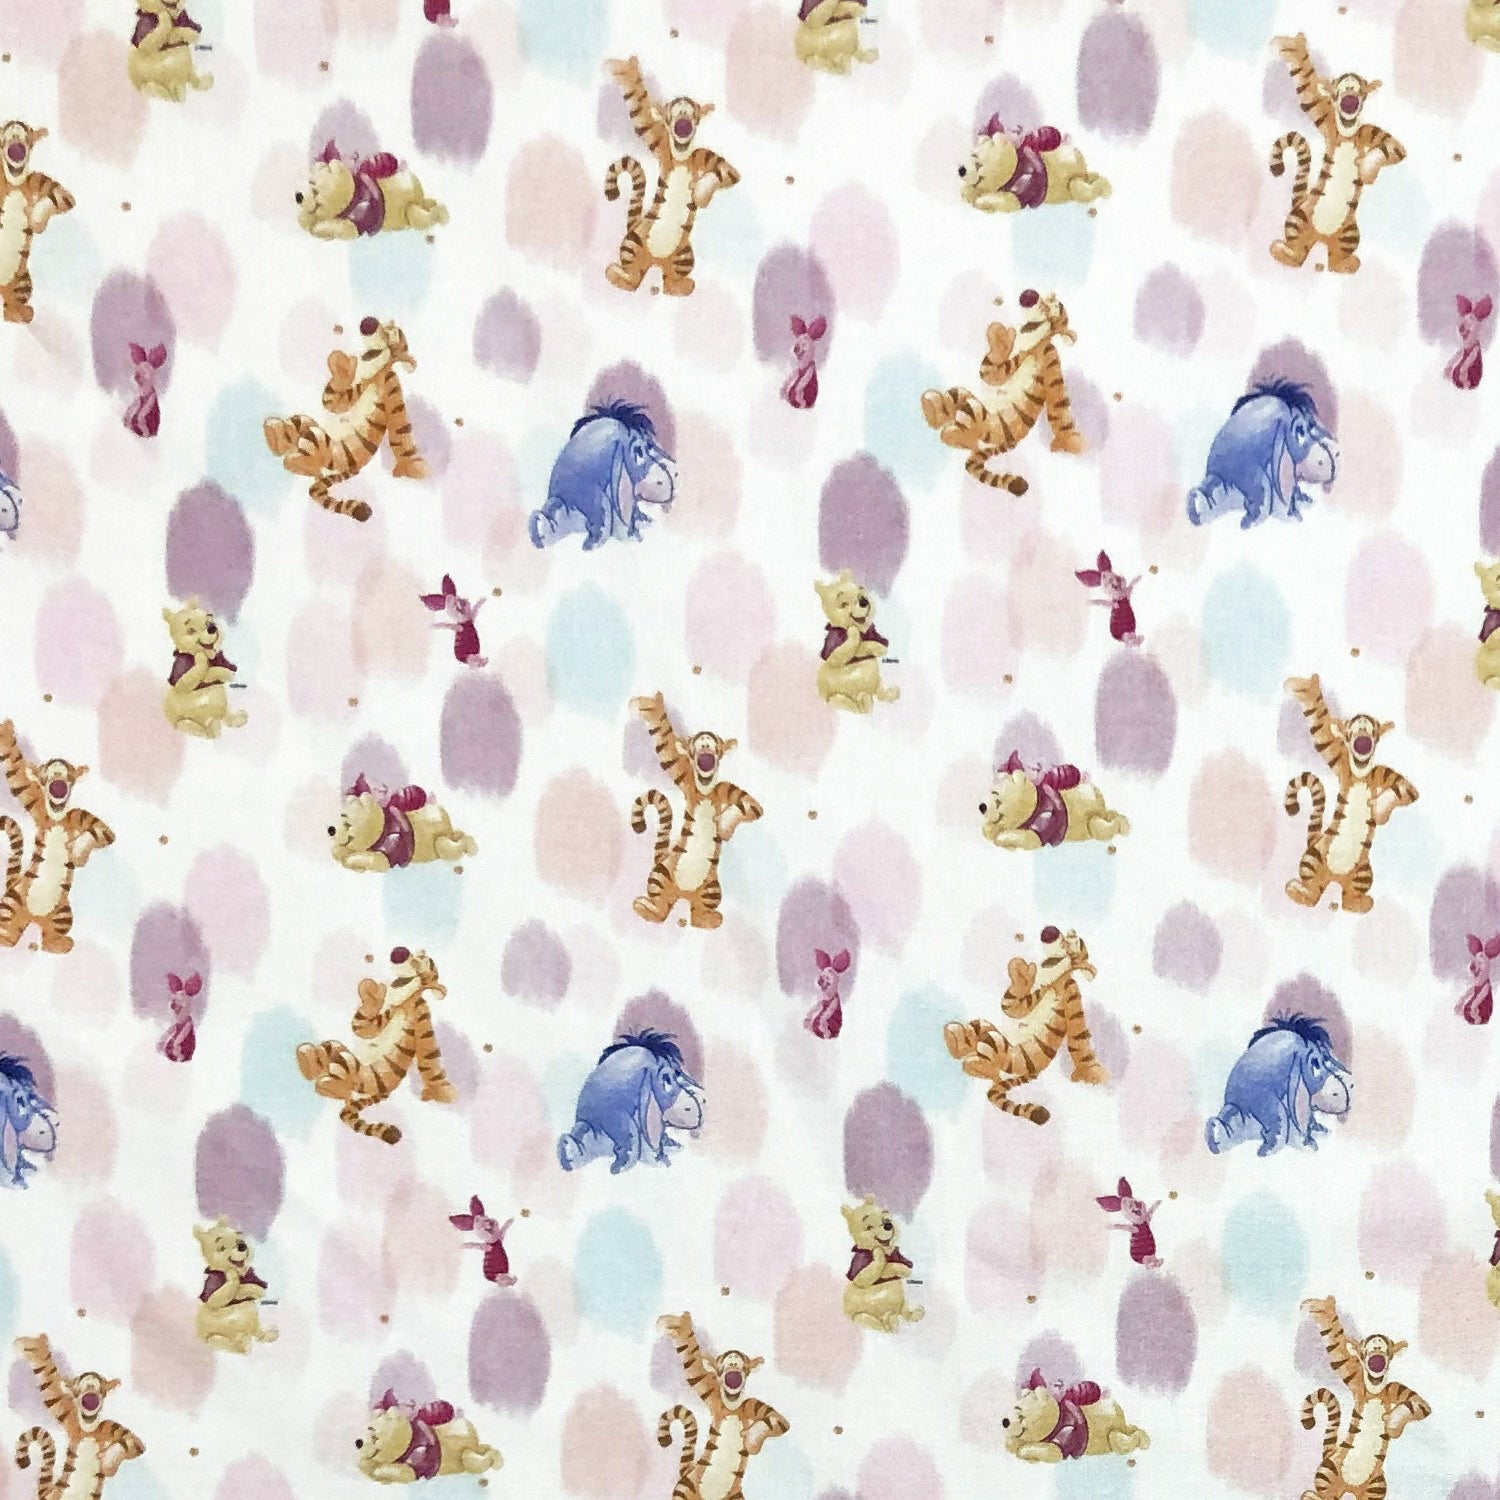 Disney All About Me! Cream Pooh & Friends Faces Fabric - Camelot Fabrics